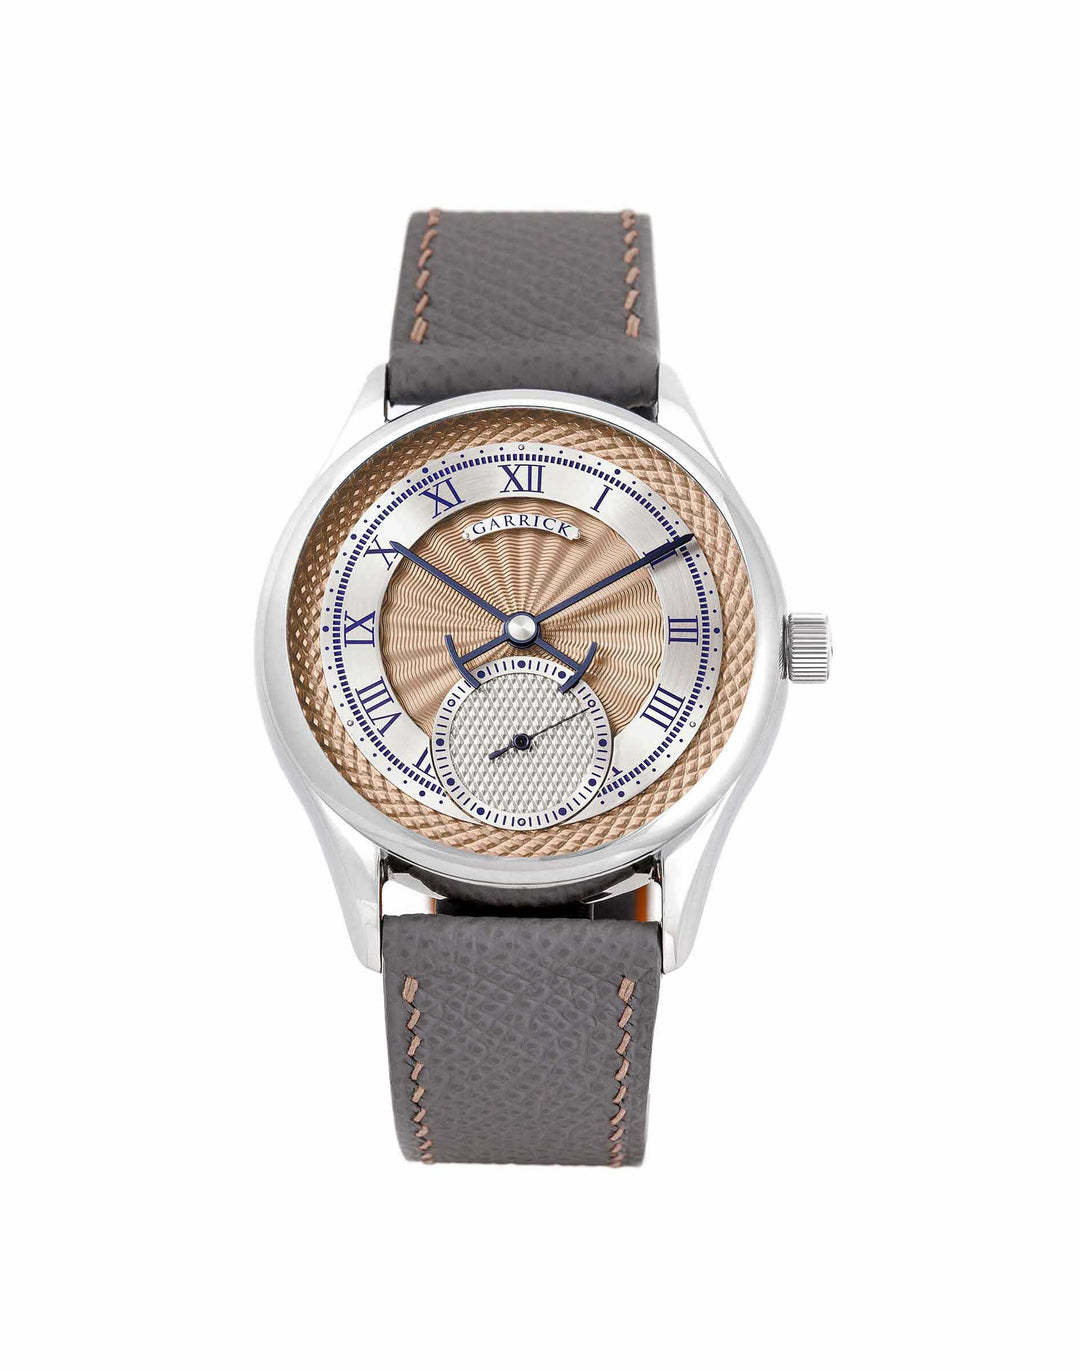 English made S7 watch with guilloche dial by Garrick Watchmakers